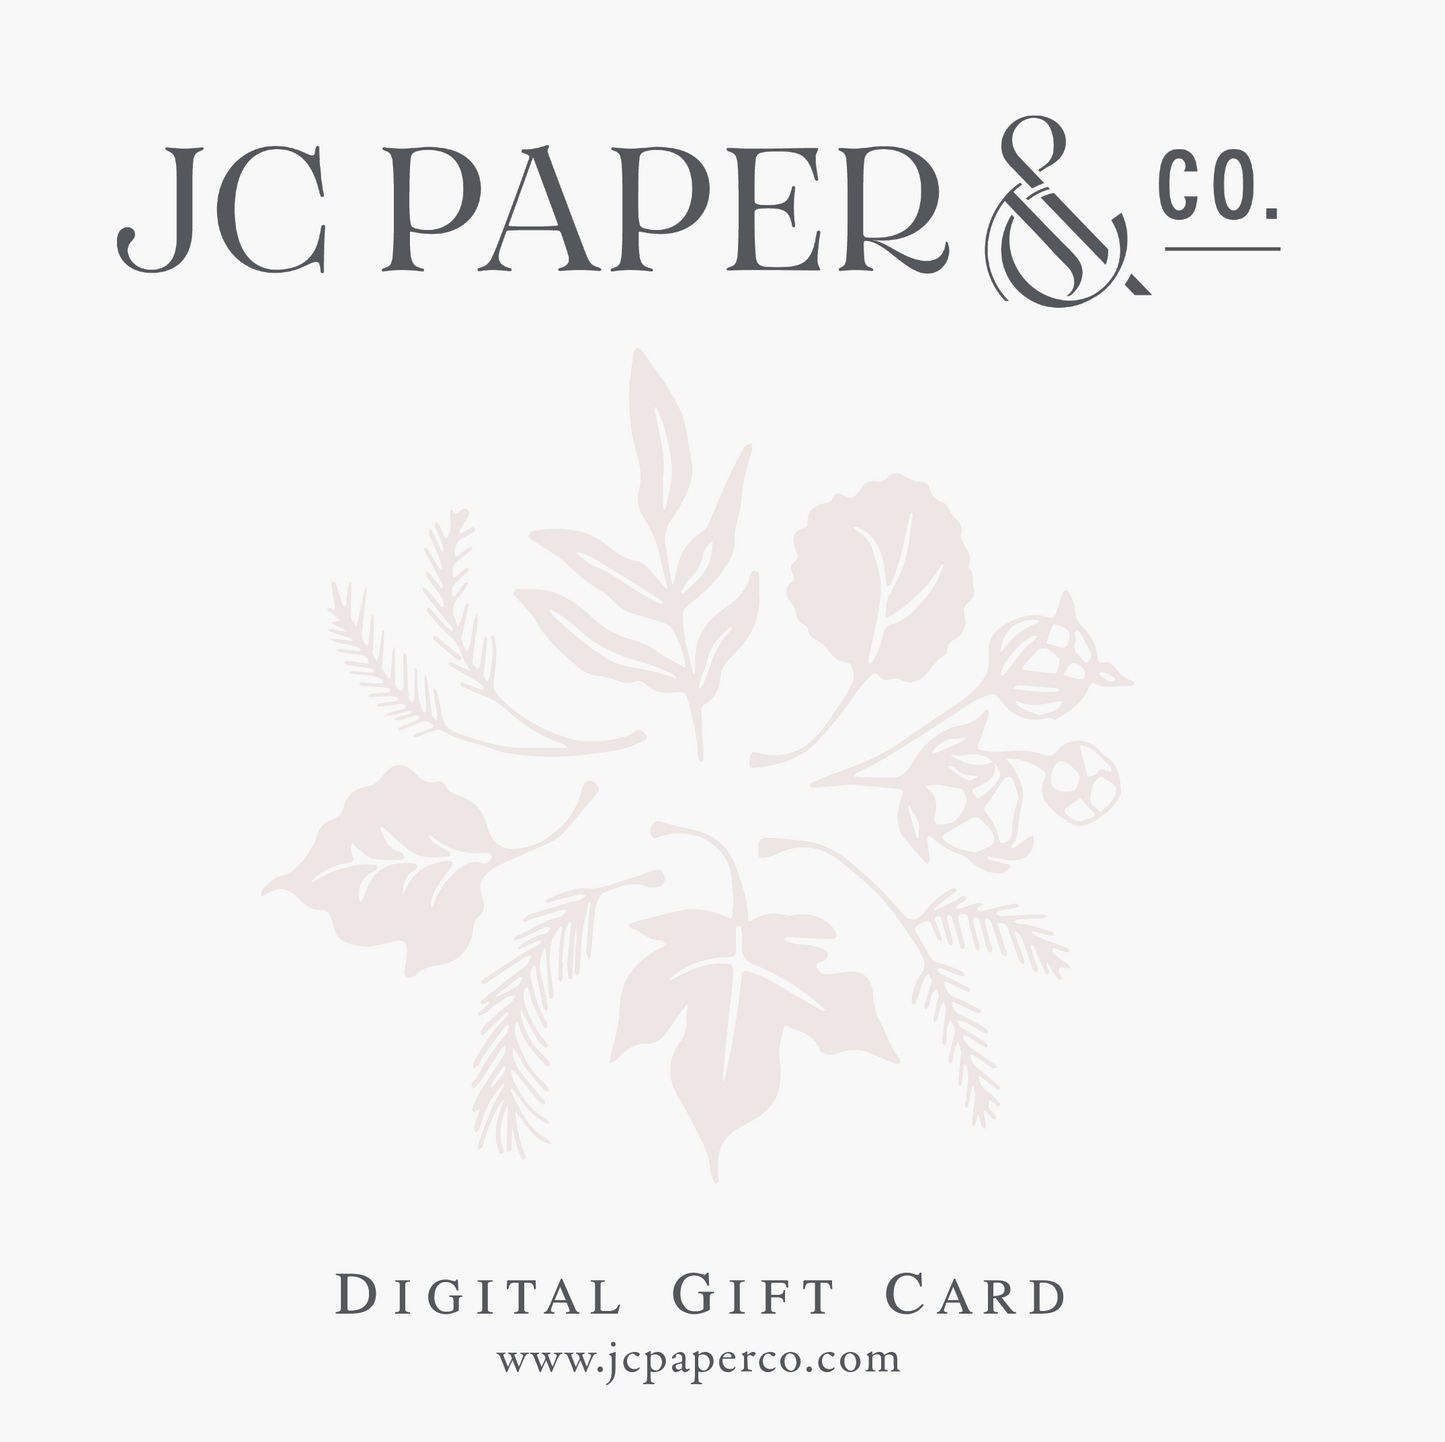 JC Paper & Co. Gift Card